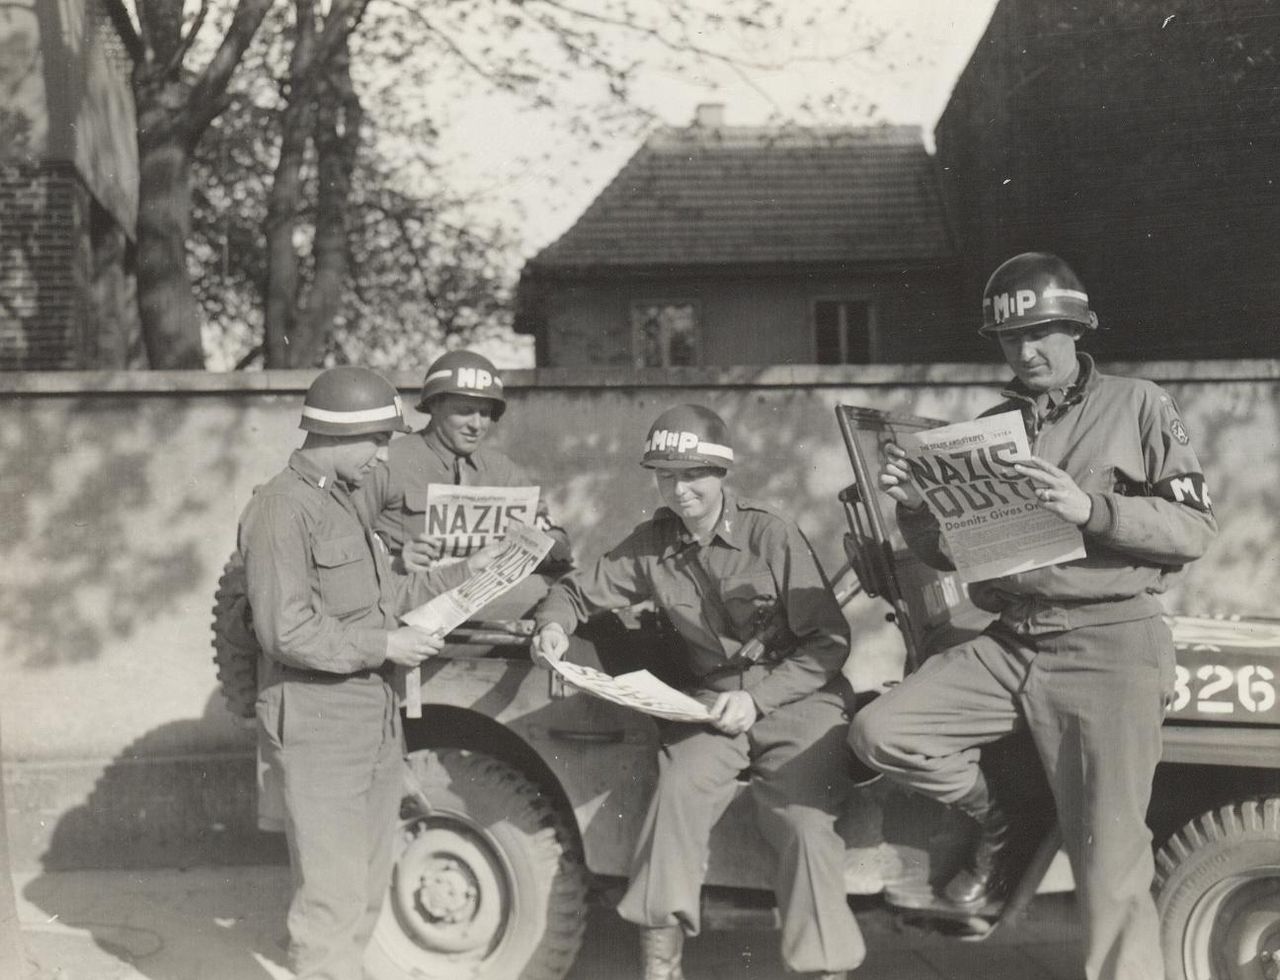 United States military policemen reading about the German surrender in the newspaper Stars and Stripes. Photo Courtesy of U.S. Army / Public Domain